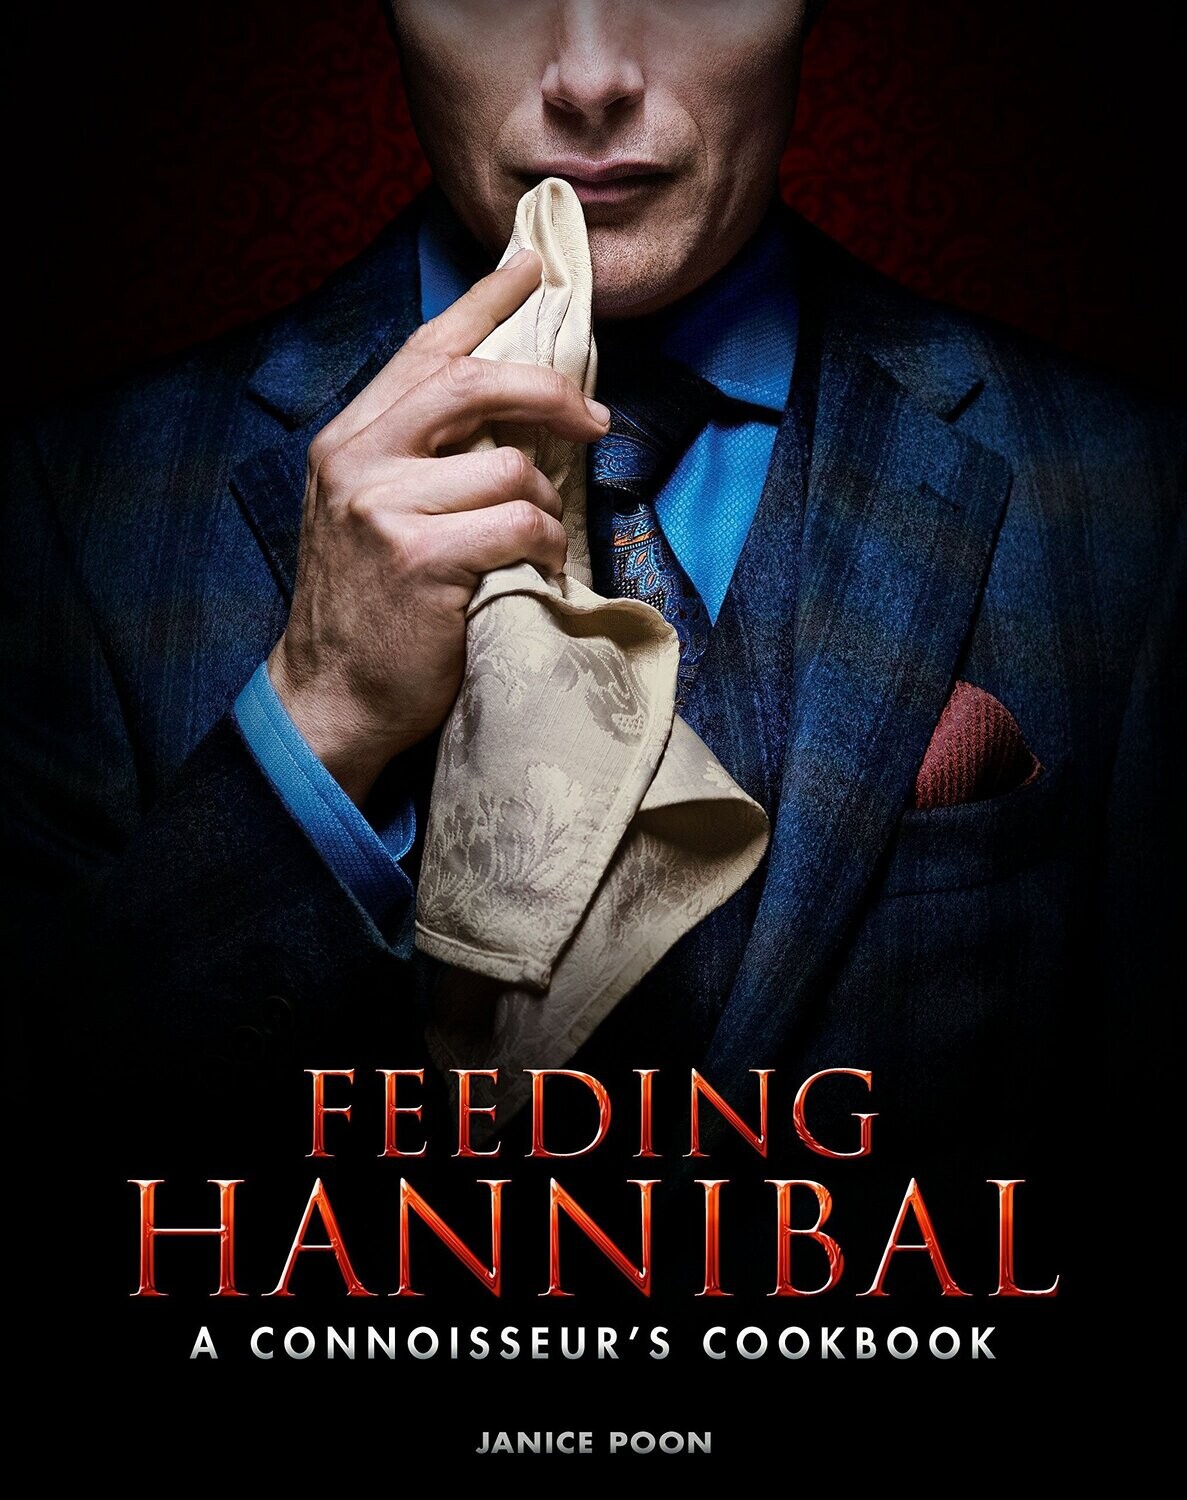 Feeding Hannibal: A Connoisseur's Cookbook (Hardcover, SIGNED)